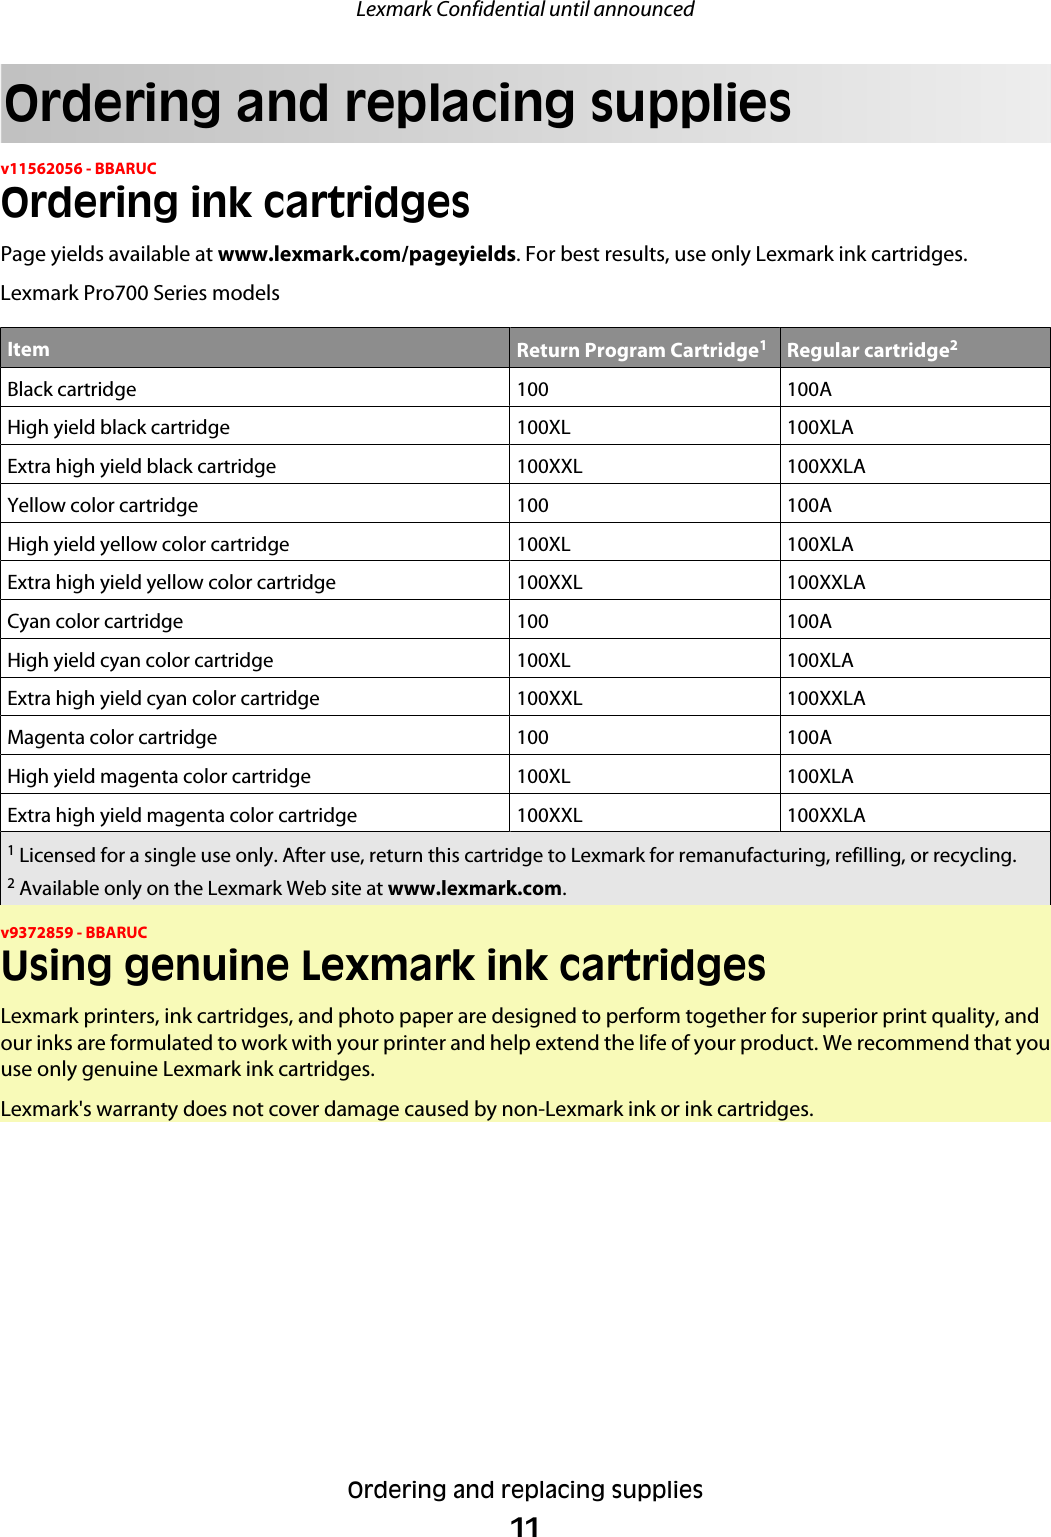 Ordering and replacing suppliesv11562056 - BBARUCOrdering ink cartridgesPage yields available at www.lexmark.com/pageyields. For best results, use only Lexmark ink cartridges.Lexmark Pro700 Series modelsItem Return Program Cartridge1Regular cartridge2Black cartridge 100 100AHigh yield black cartridge 100XL 100XLAExtra high yield black cartridge 100XXL 100XXLAYellow color cartridge 100 100AHigh yield yellow color cartridge 100XL 100XLAExtra high yield yellow color cartridge 100XXL 100XXLACyan color cartridge 100 100AHigh yield cyan color cartridge 100XL 100XLAExtra high yield cyan color cartridge 100XXL 100XXLAMagenta color cartridge 100 100AHigh yield magenta color cartridge 100XL 100XLAExtra high yield magenta color cartridge 100XXL 100XXLA1 Licensed for a single use only. After use, return this cartridge to Lexmark for remanufacturing, refilling, or recycling.2 Available only on the Lexmark Web site at www.lexmark.com.v9372859 - BBARUCUsing genuine Lexmark ink cartridgesLexmark printers, ink cartridges, and photo paper are designed to perform together for superior print quality, andour inks are formulated to work with your printer and help extend the life of your product. We recommend that youuse only genuine Lexmark ink cartridges.Lexmark&apos;s warranty does not cover damage caused by non-Lexmark ink or ink cartridges.Lexmark Confidential until announcedOrdering and replacing supplies11